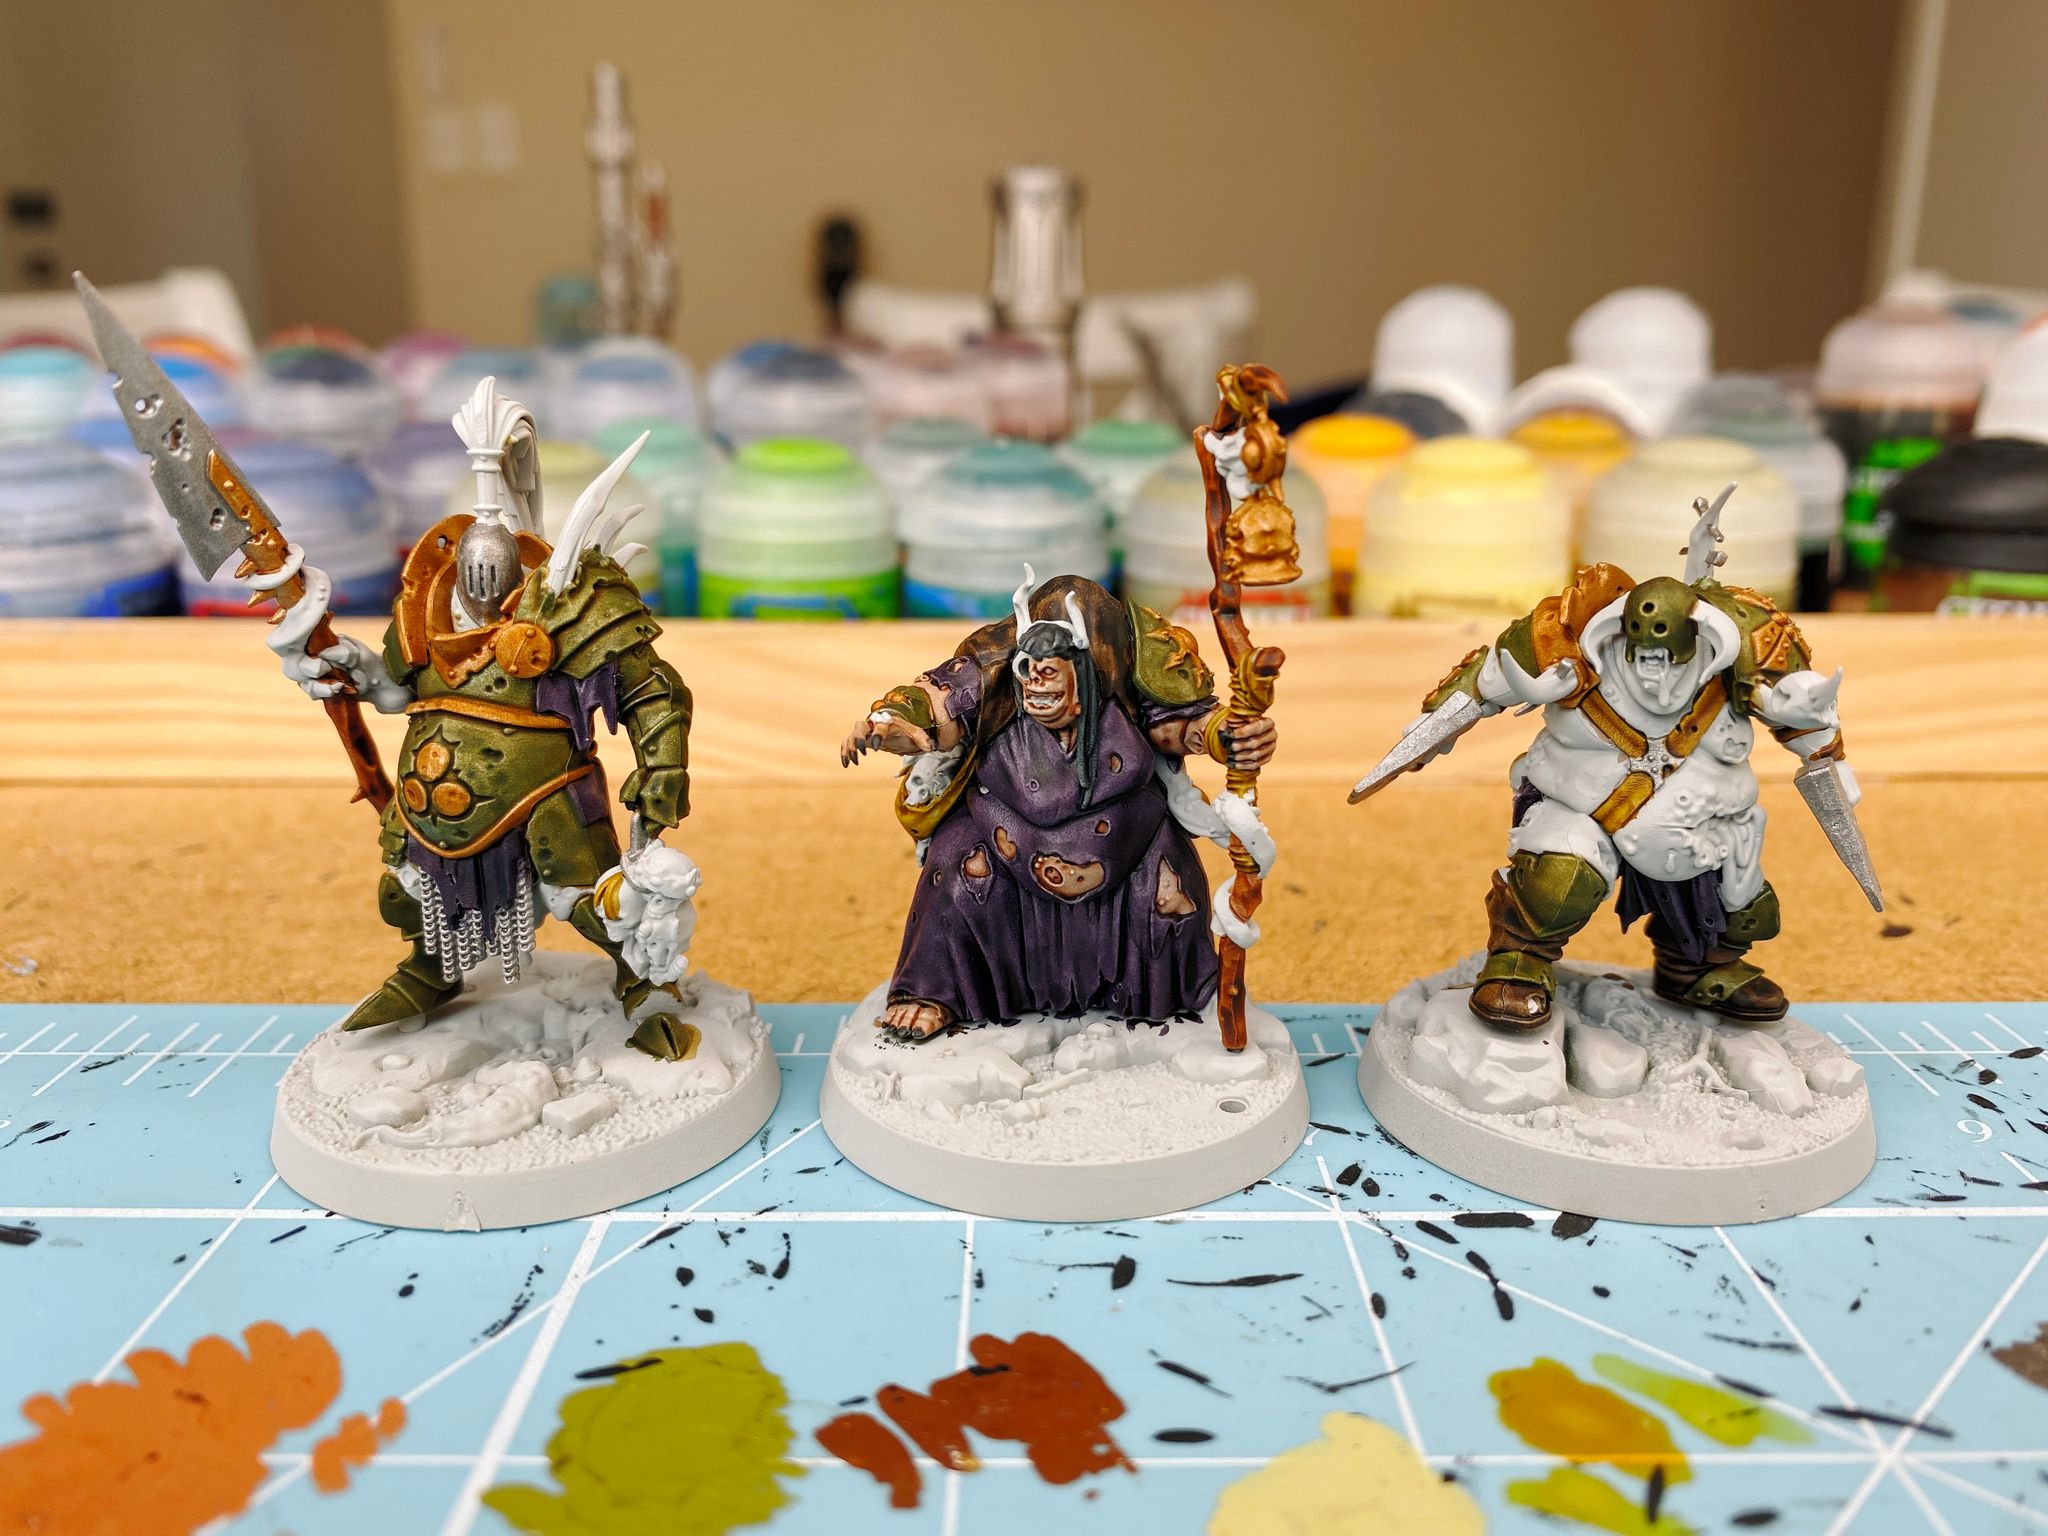 A photo of 3 partially-painted Warhammer Underworlds miniatures. One is heavily armoured and has a spear in one hand and a rack of severed heads in the other, one is corpulent and in ragged robes with holes in them, holding a staff in one hand and has her other hand out like she's casting a spell, and the 3rd is also corpulent with a gash on the side of his stomach and his insides spilling out. He's roaring and holding two axes.